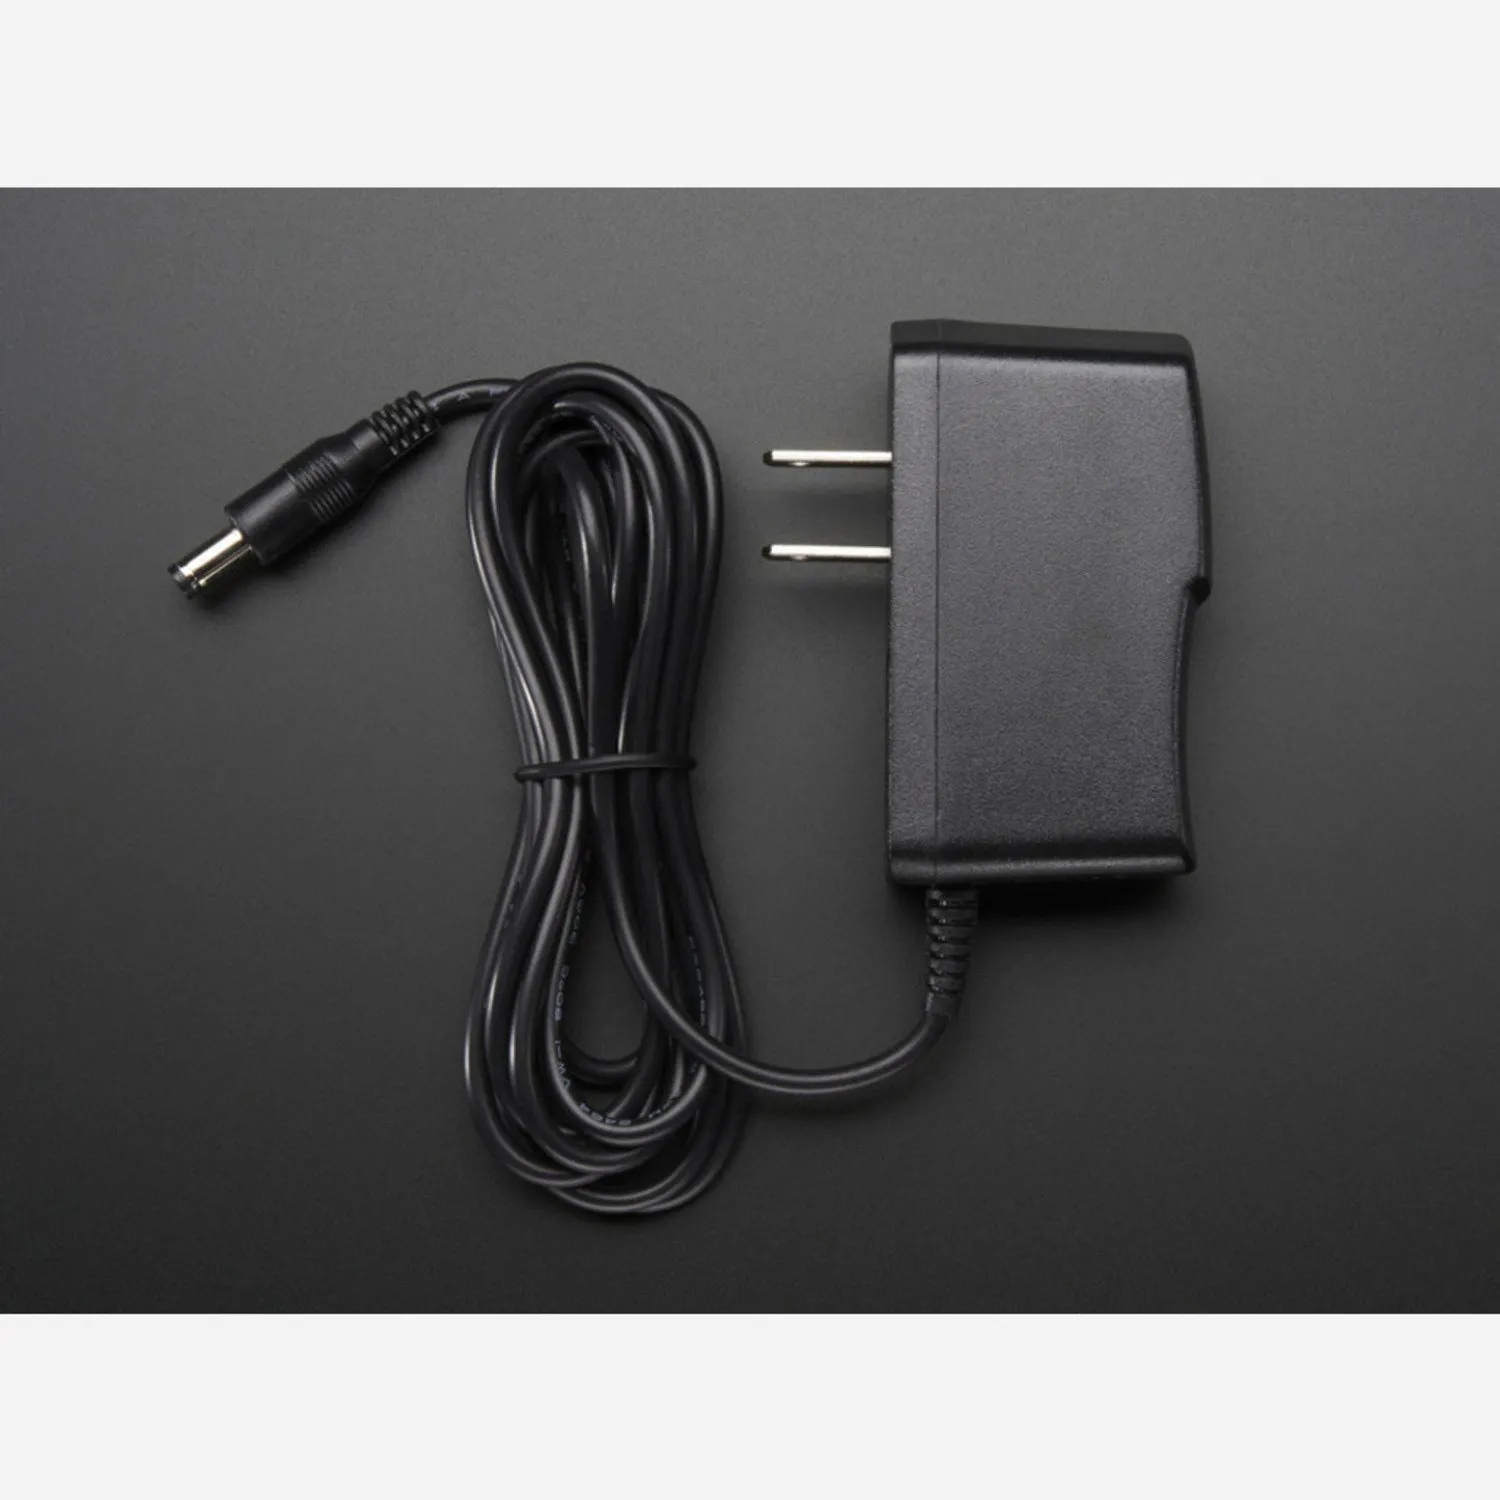 Photo of 12 VDC 1000mA regulated switching power adapter - UL listed